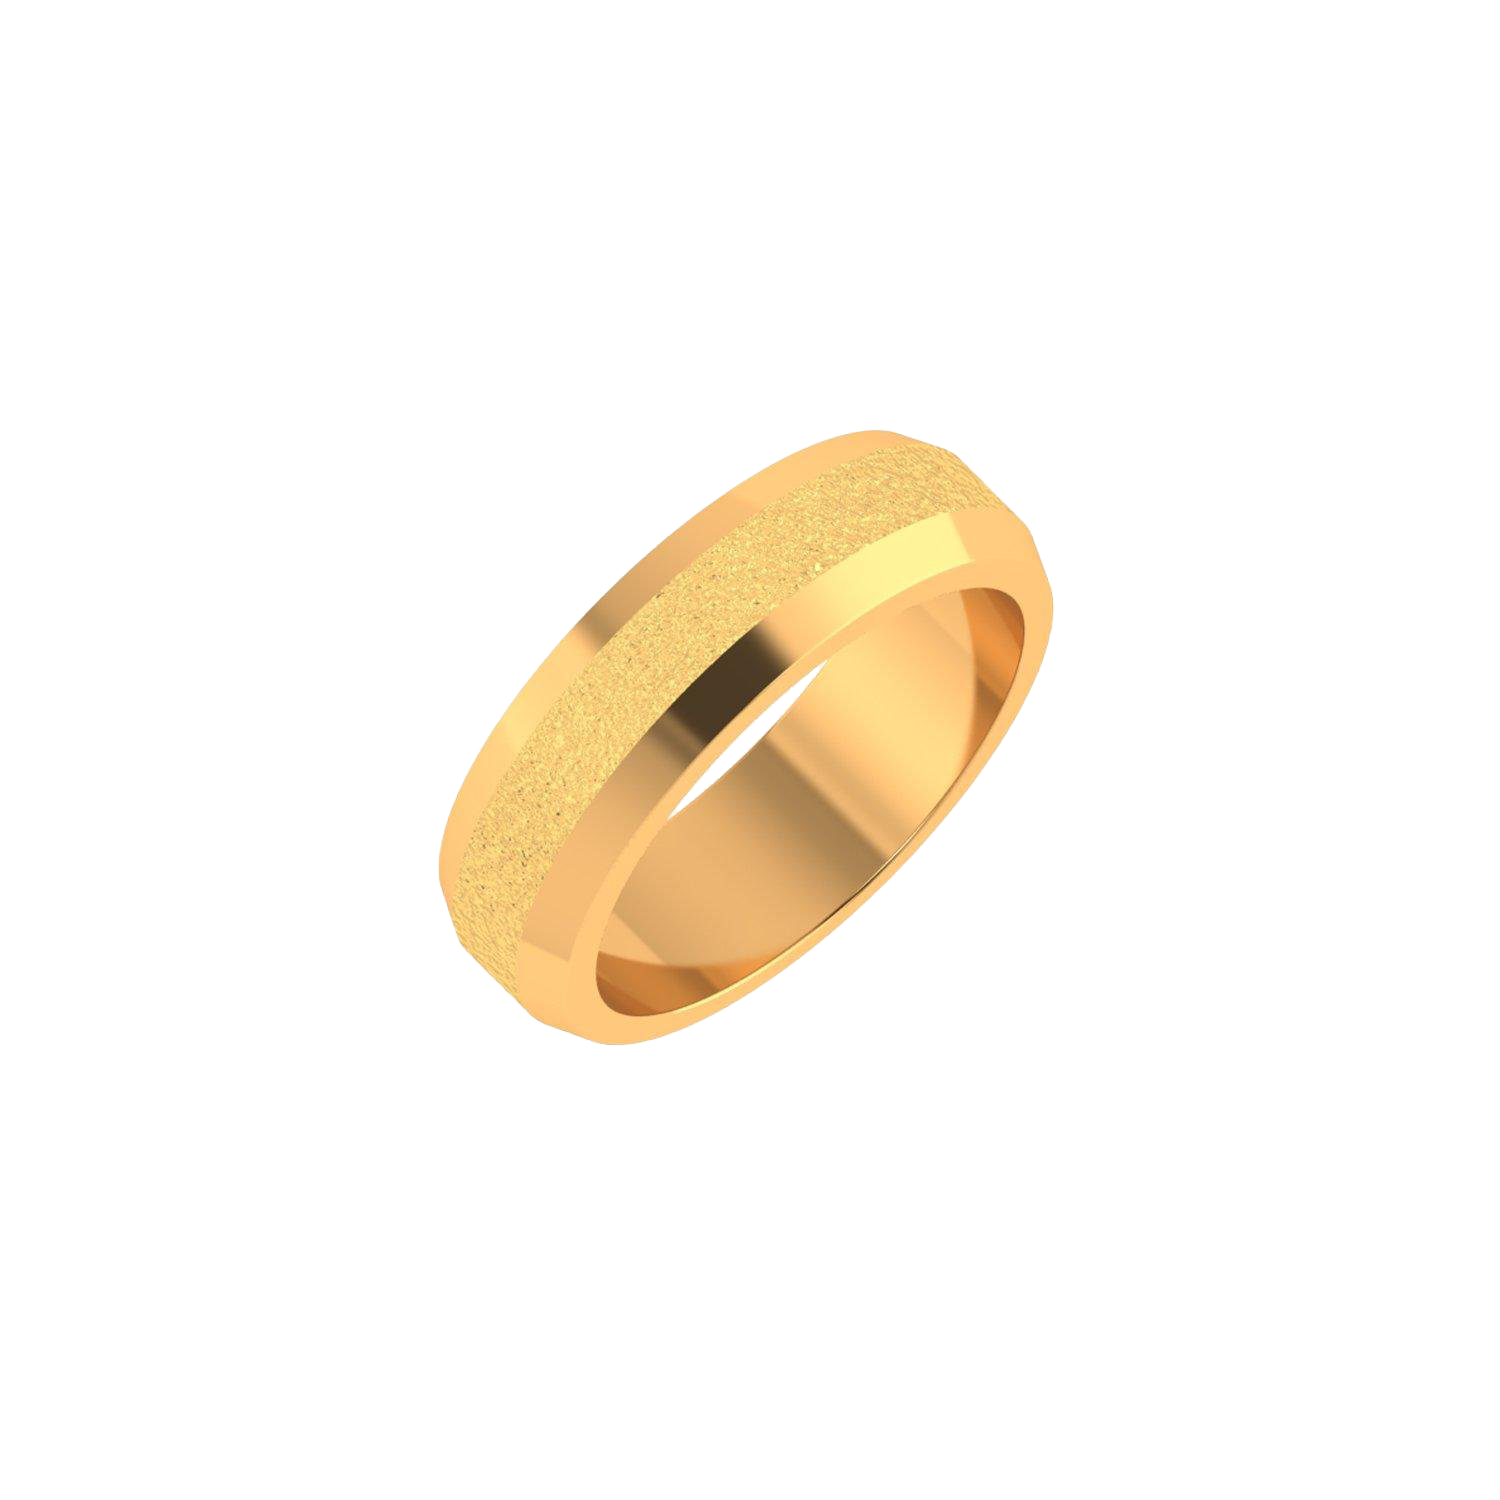 Engagement Gold Ring PNG High-Quality Image